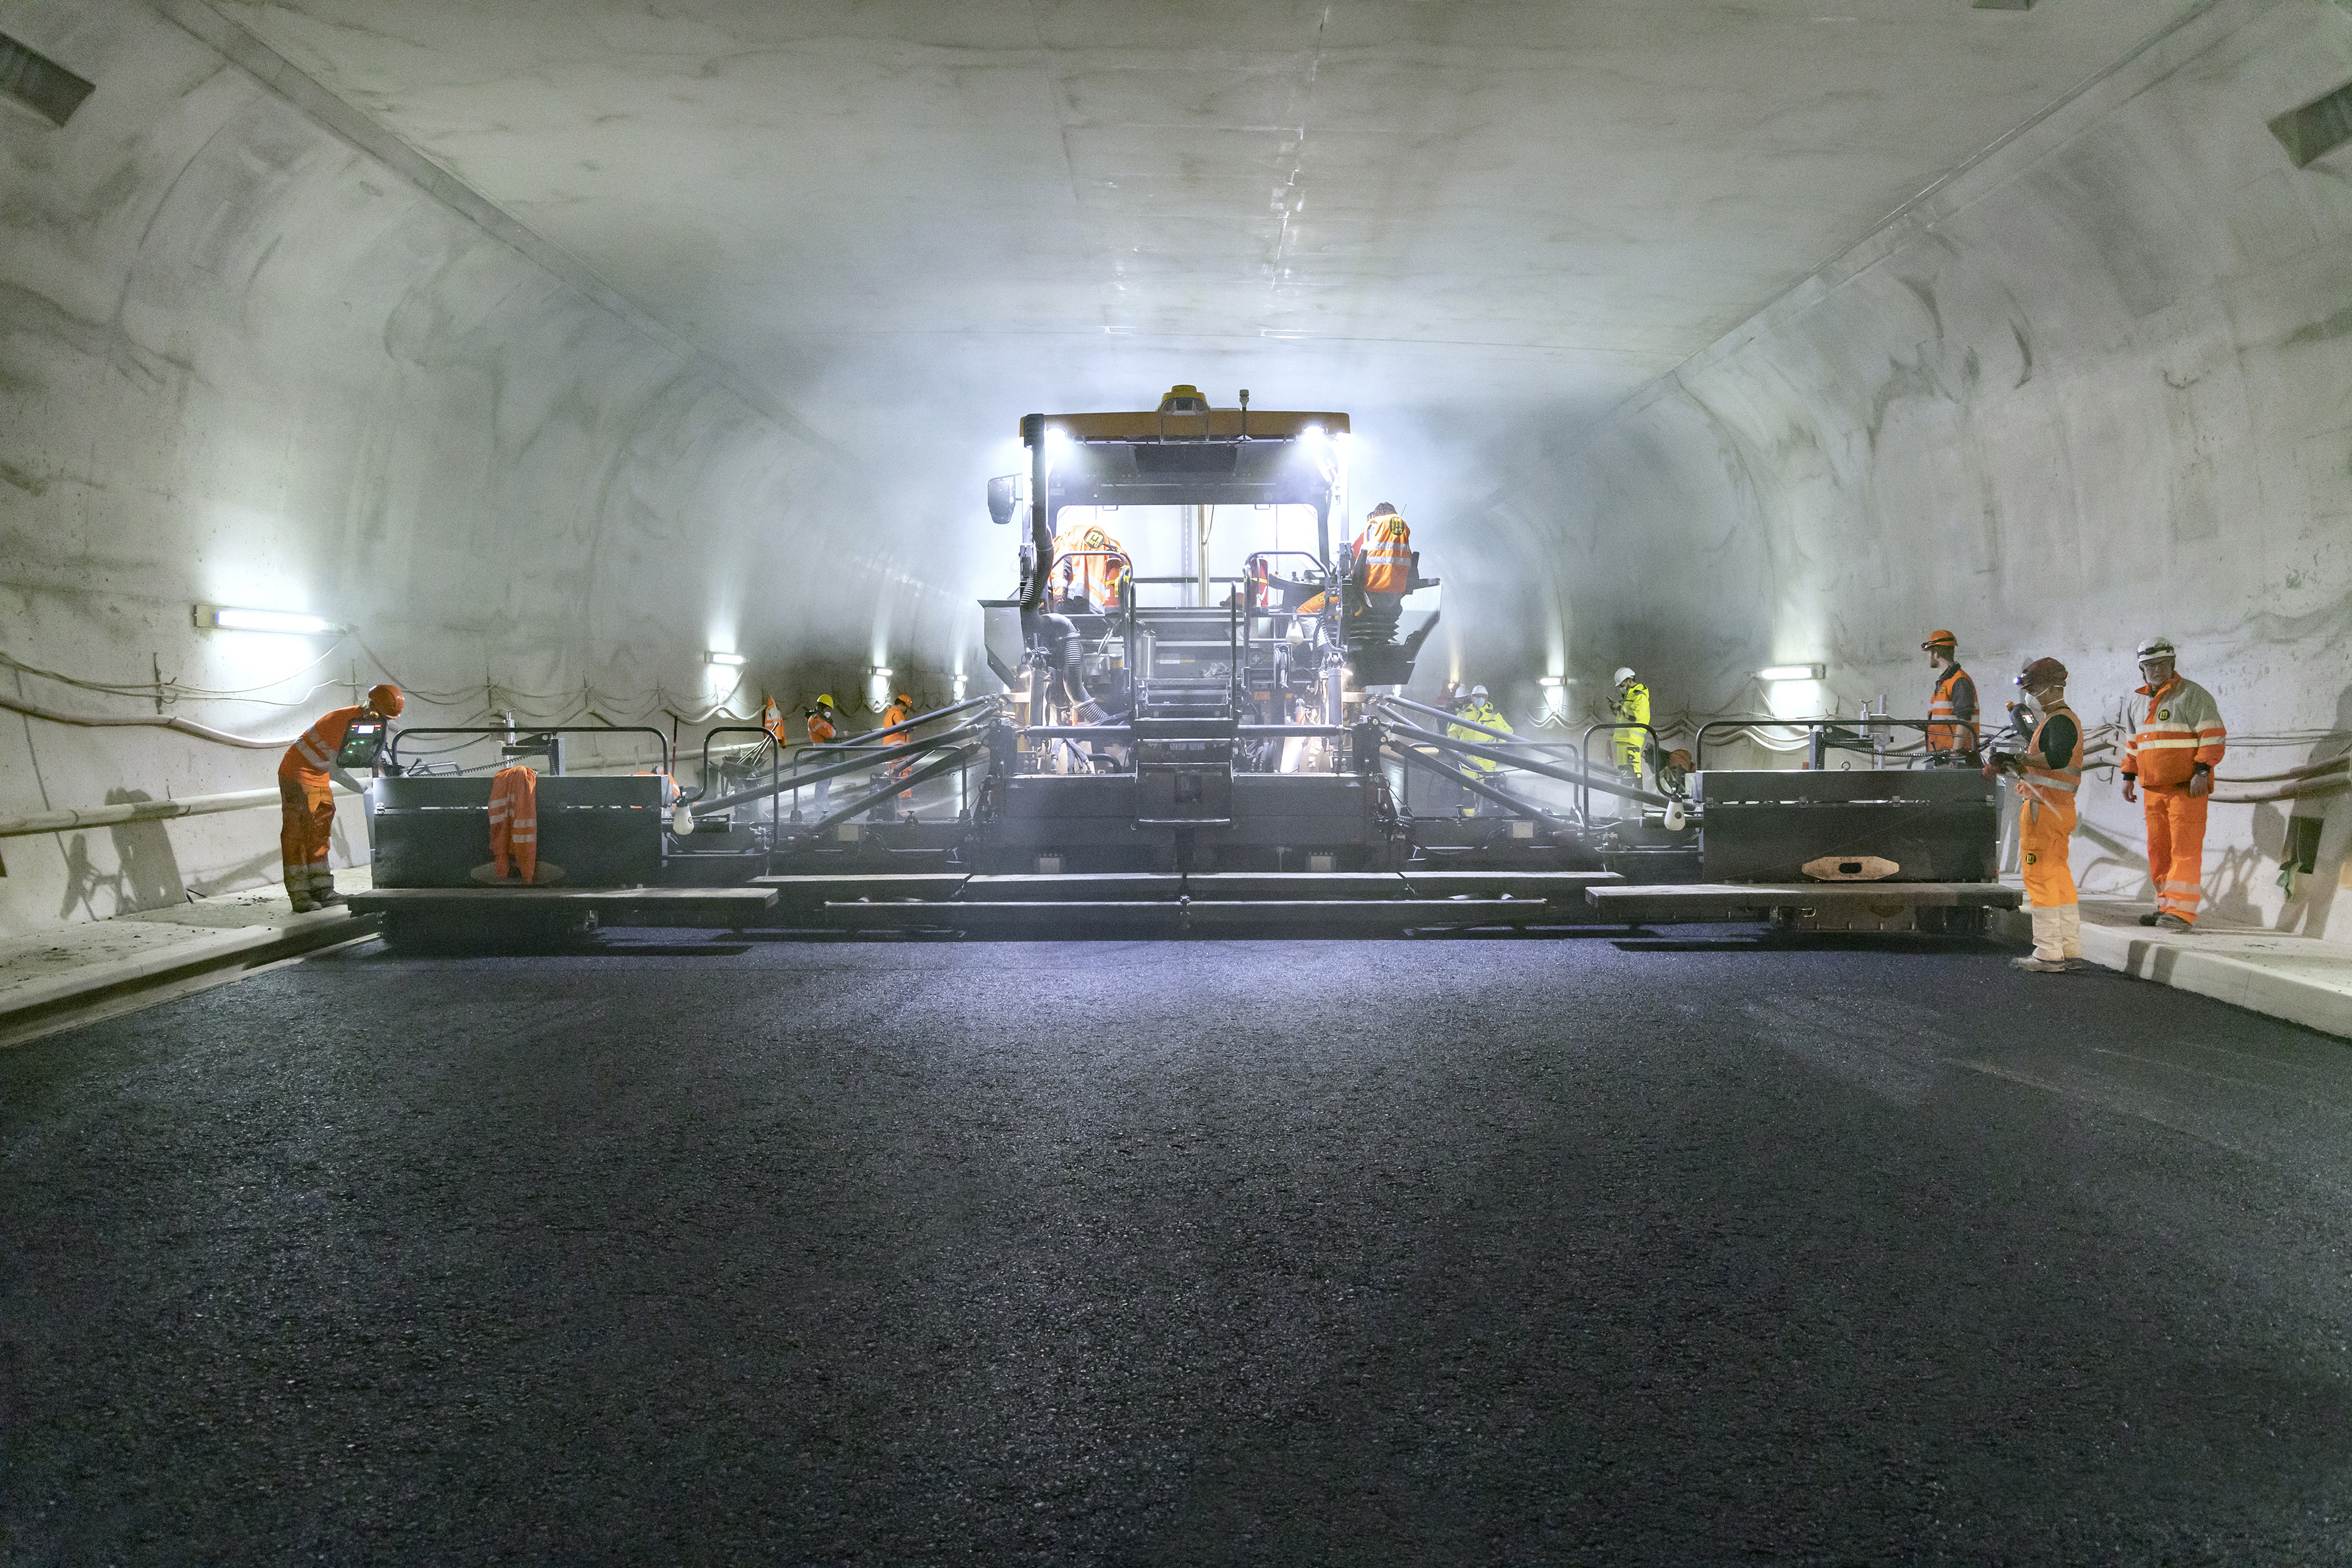 Paving in the widest tunnel in Switzerland: successful large-scale project with Vögele’s machine technology and WITOS Paving Plus process optimisation solution 